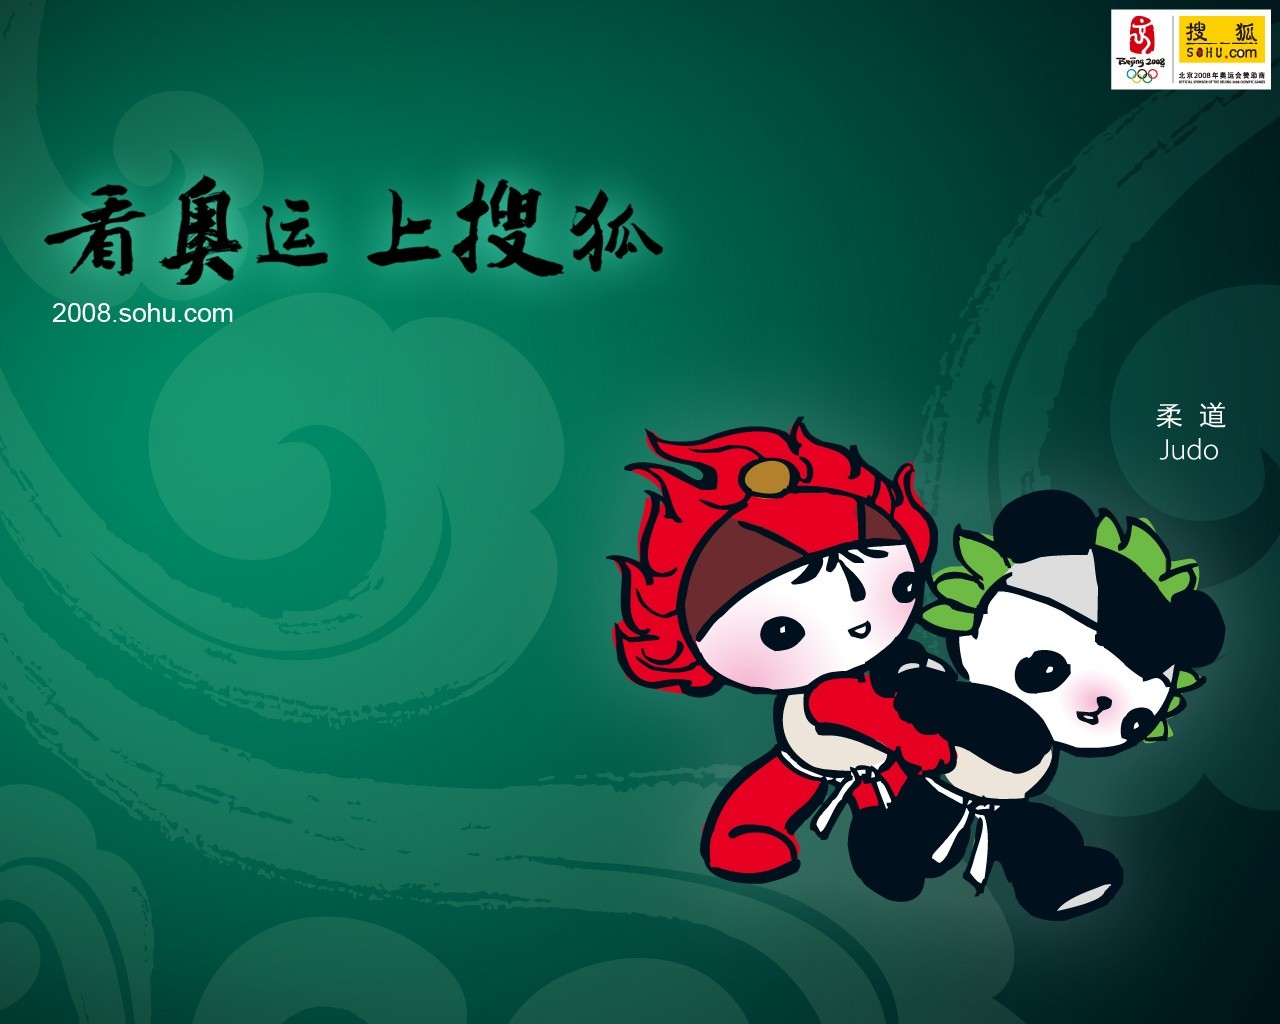 08 Olympic Games Fuwa Wallpapers #19 - 1280x1024